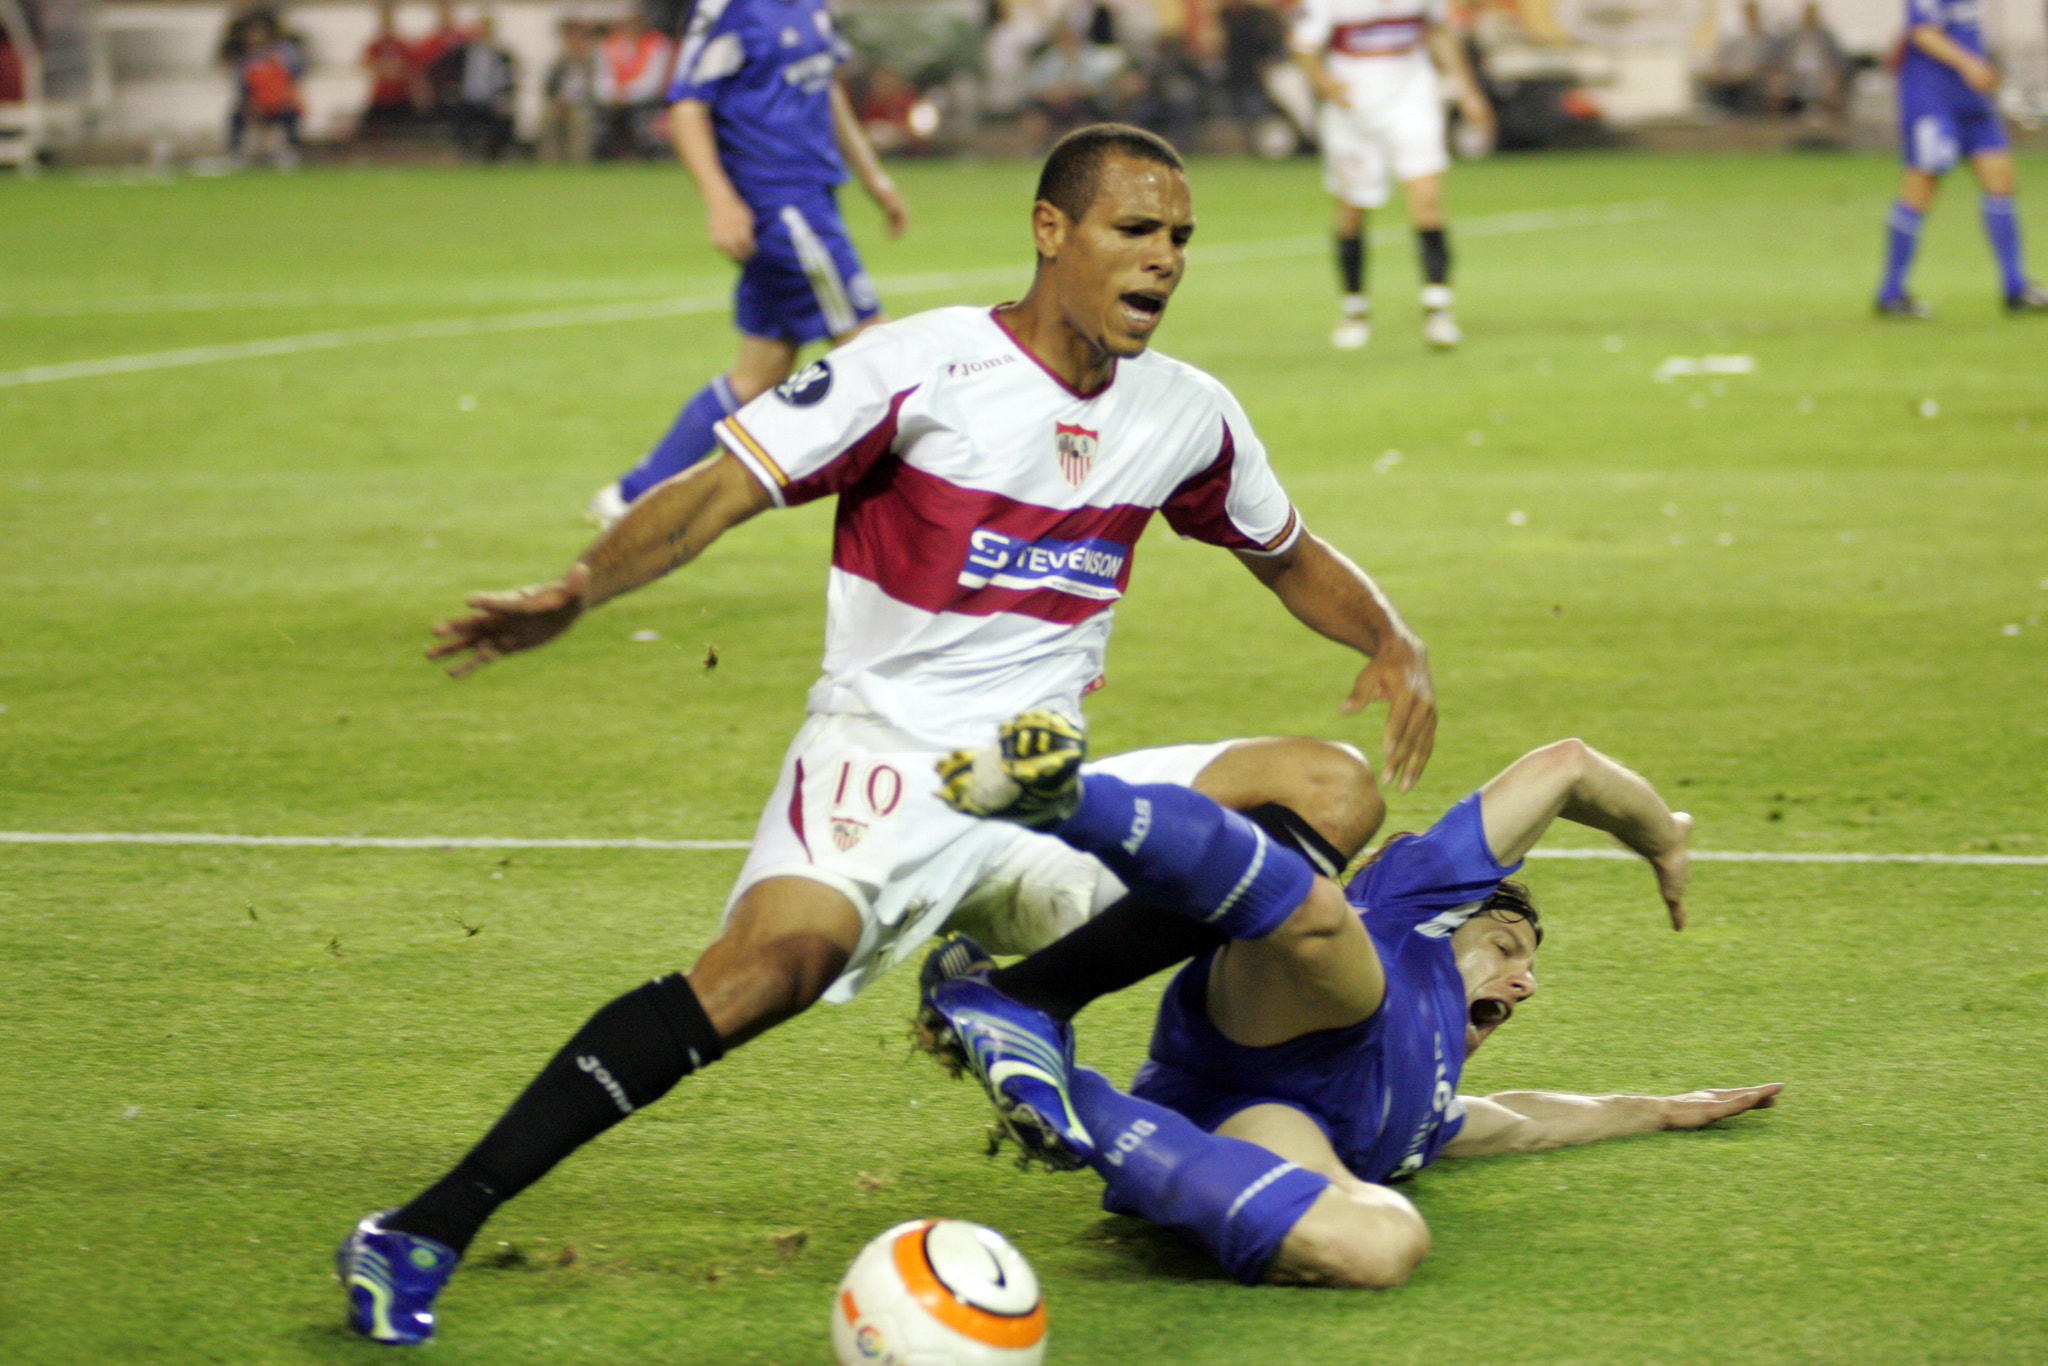 Luis Fabiano and Rafinha fighting for the ball